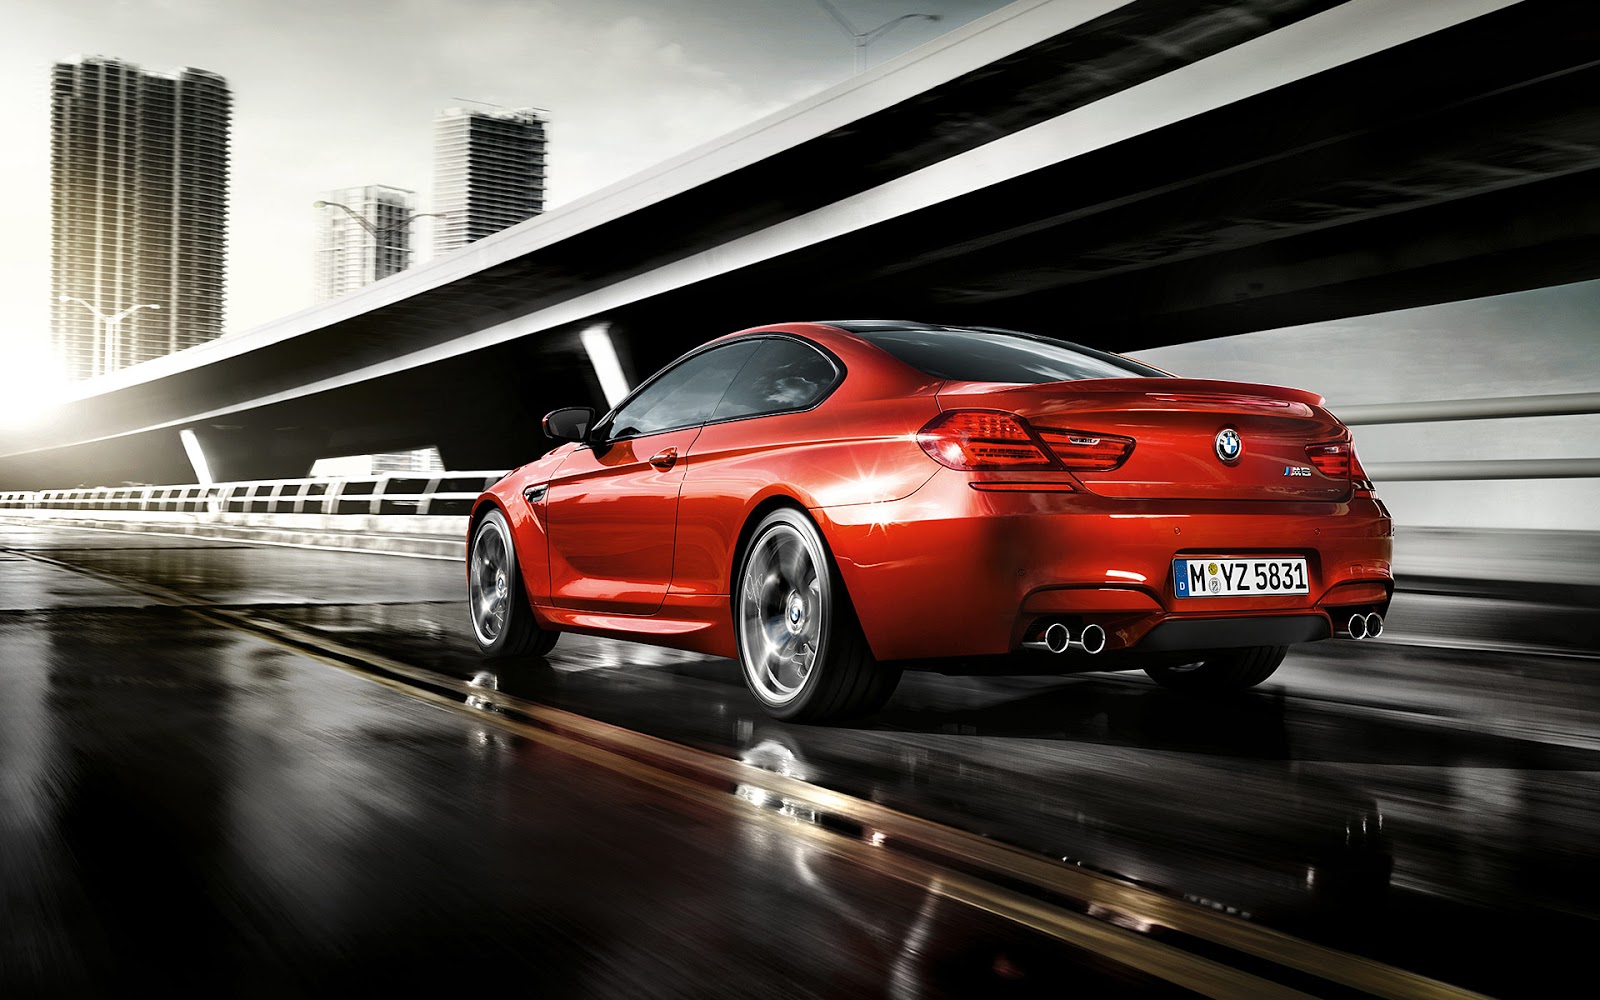 Free download wallpapers hd for mac BMW M6 Coupe Wallpaper HD